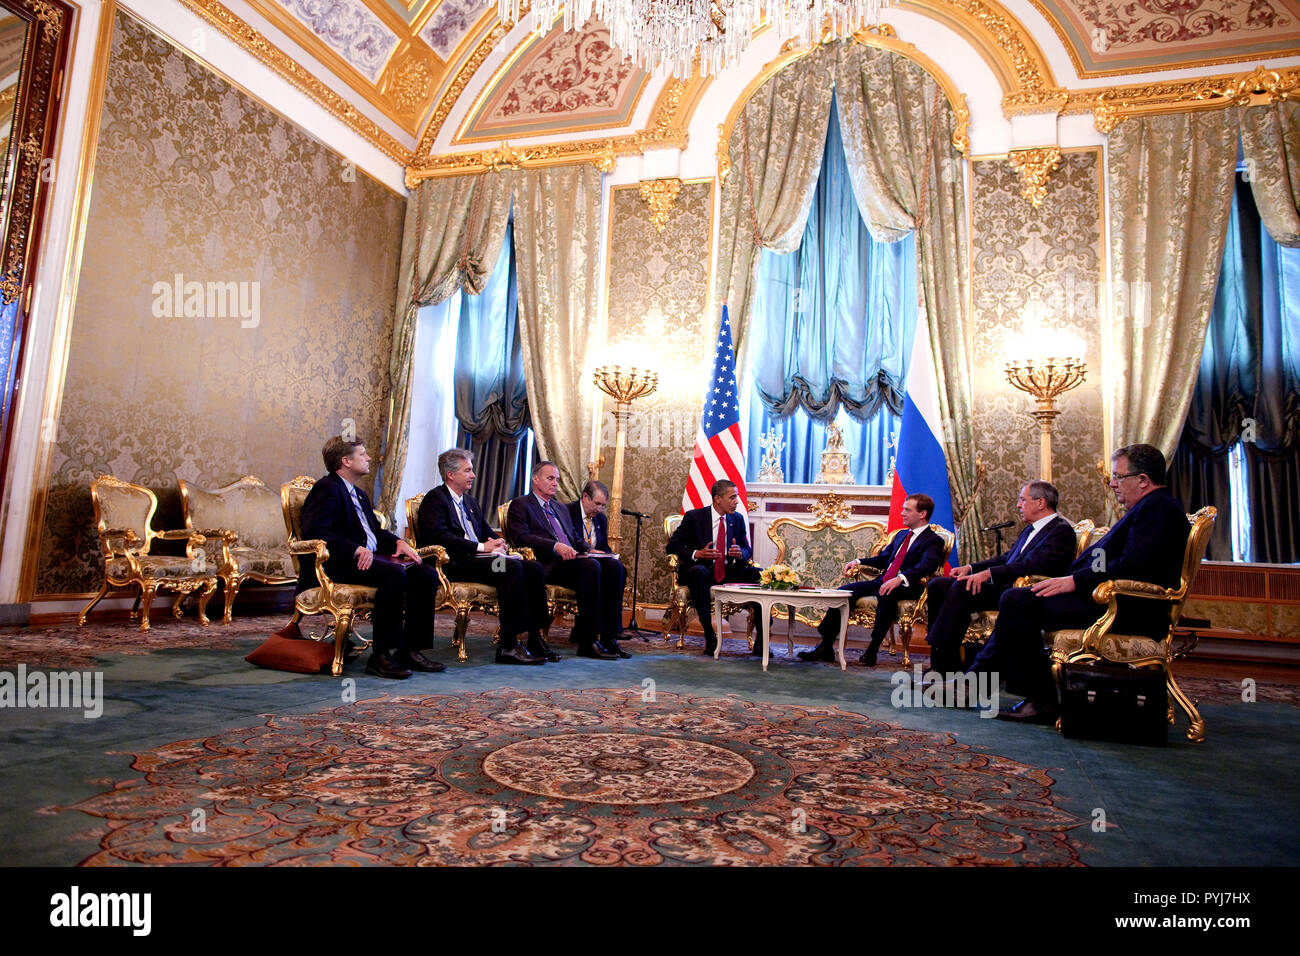 President Barack Obama meets with Russian President Medvedev in the Kremlin, Moscow Russia, July 6, 2009. Stock Photo